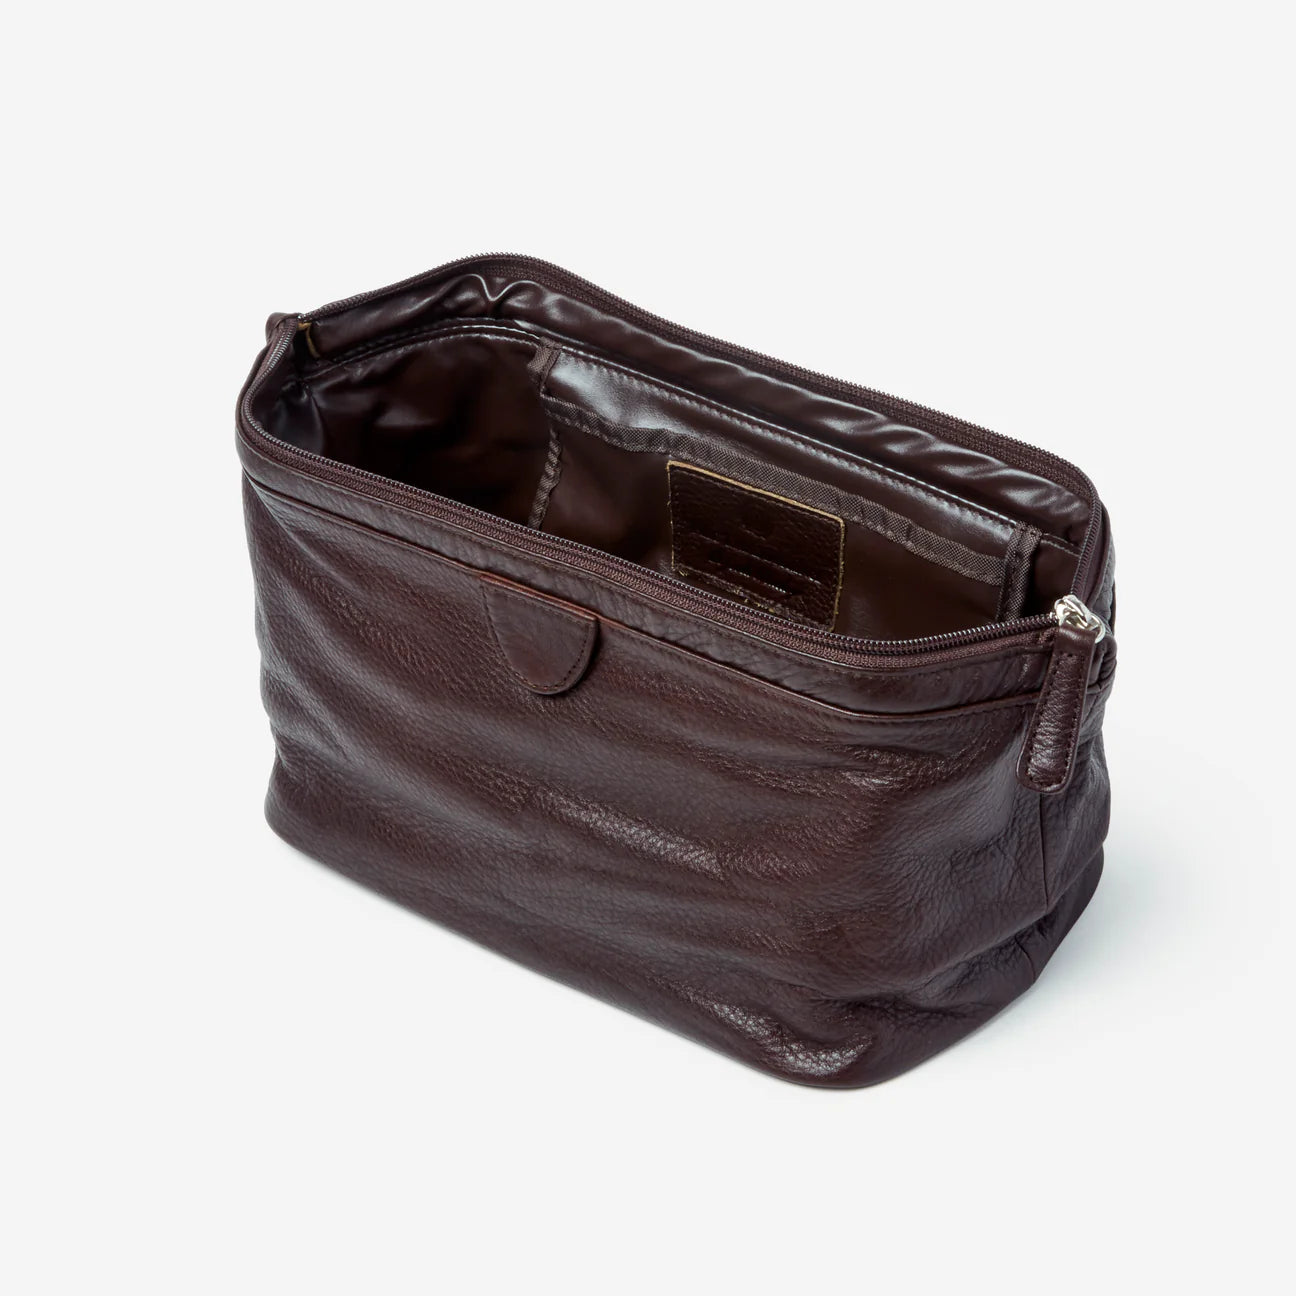 Osgoode Marley Facile Top Leather Travel Toiletry/Shave Bag